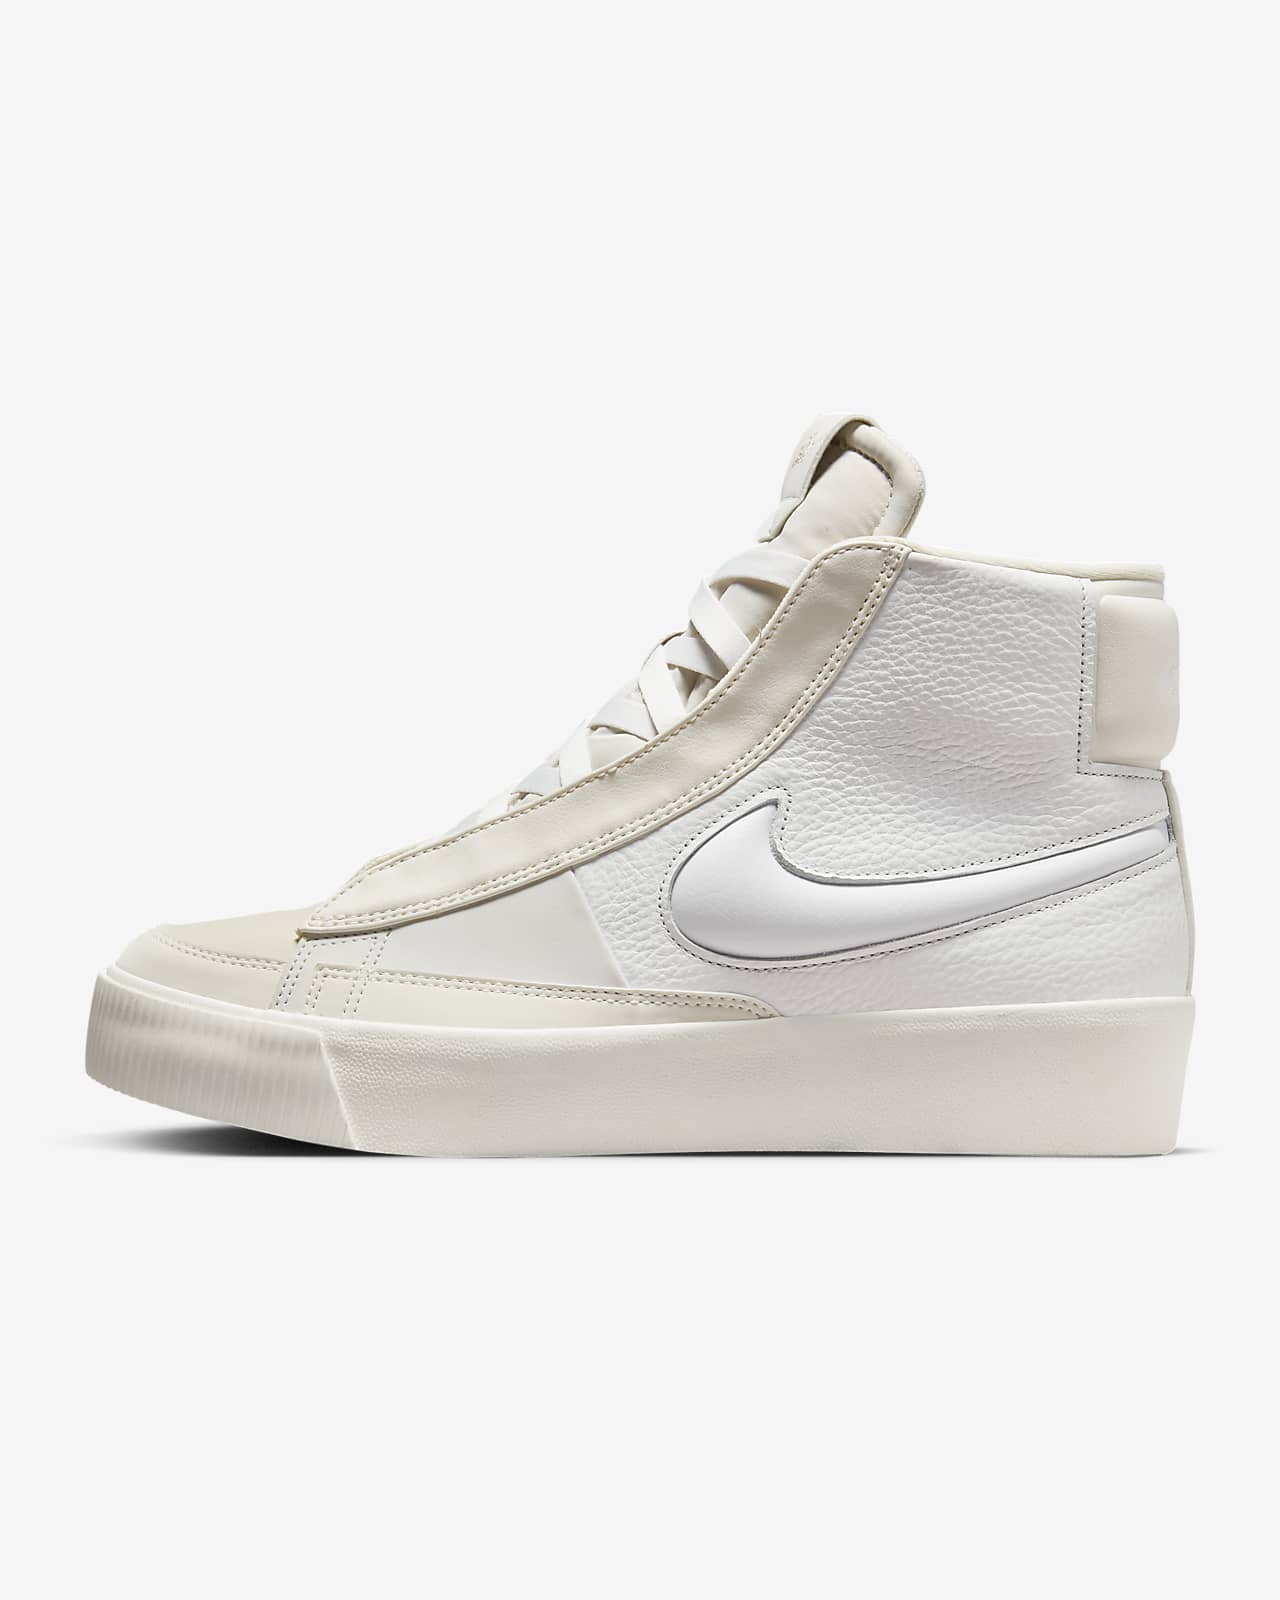 Chaussure Nike Blazer Mid Victory pour Femme